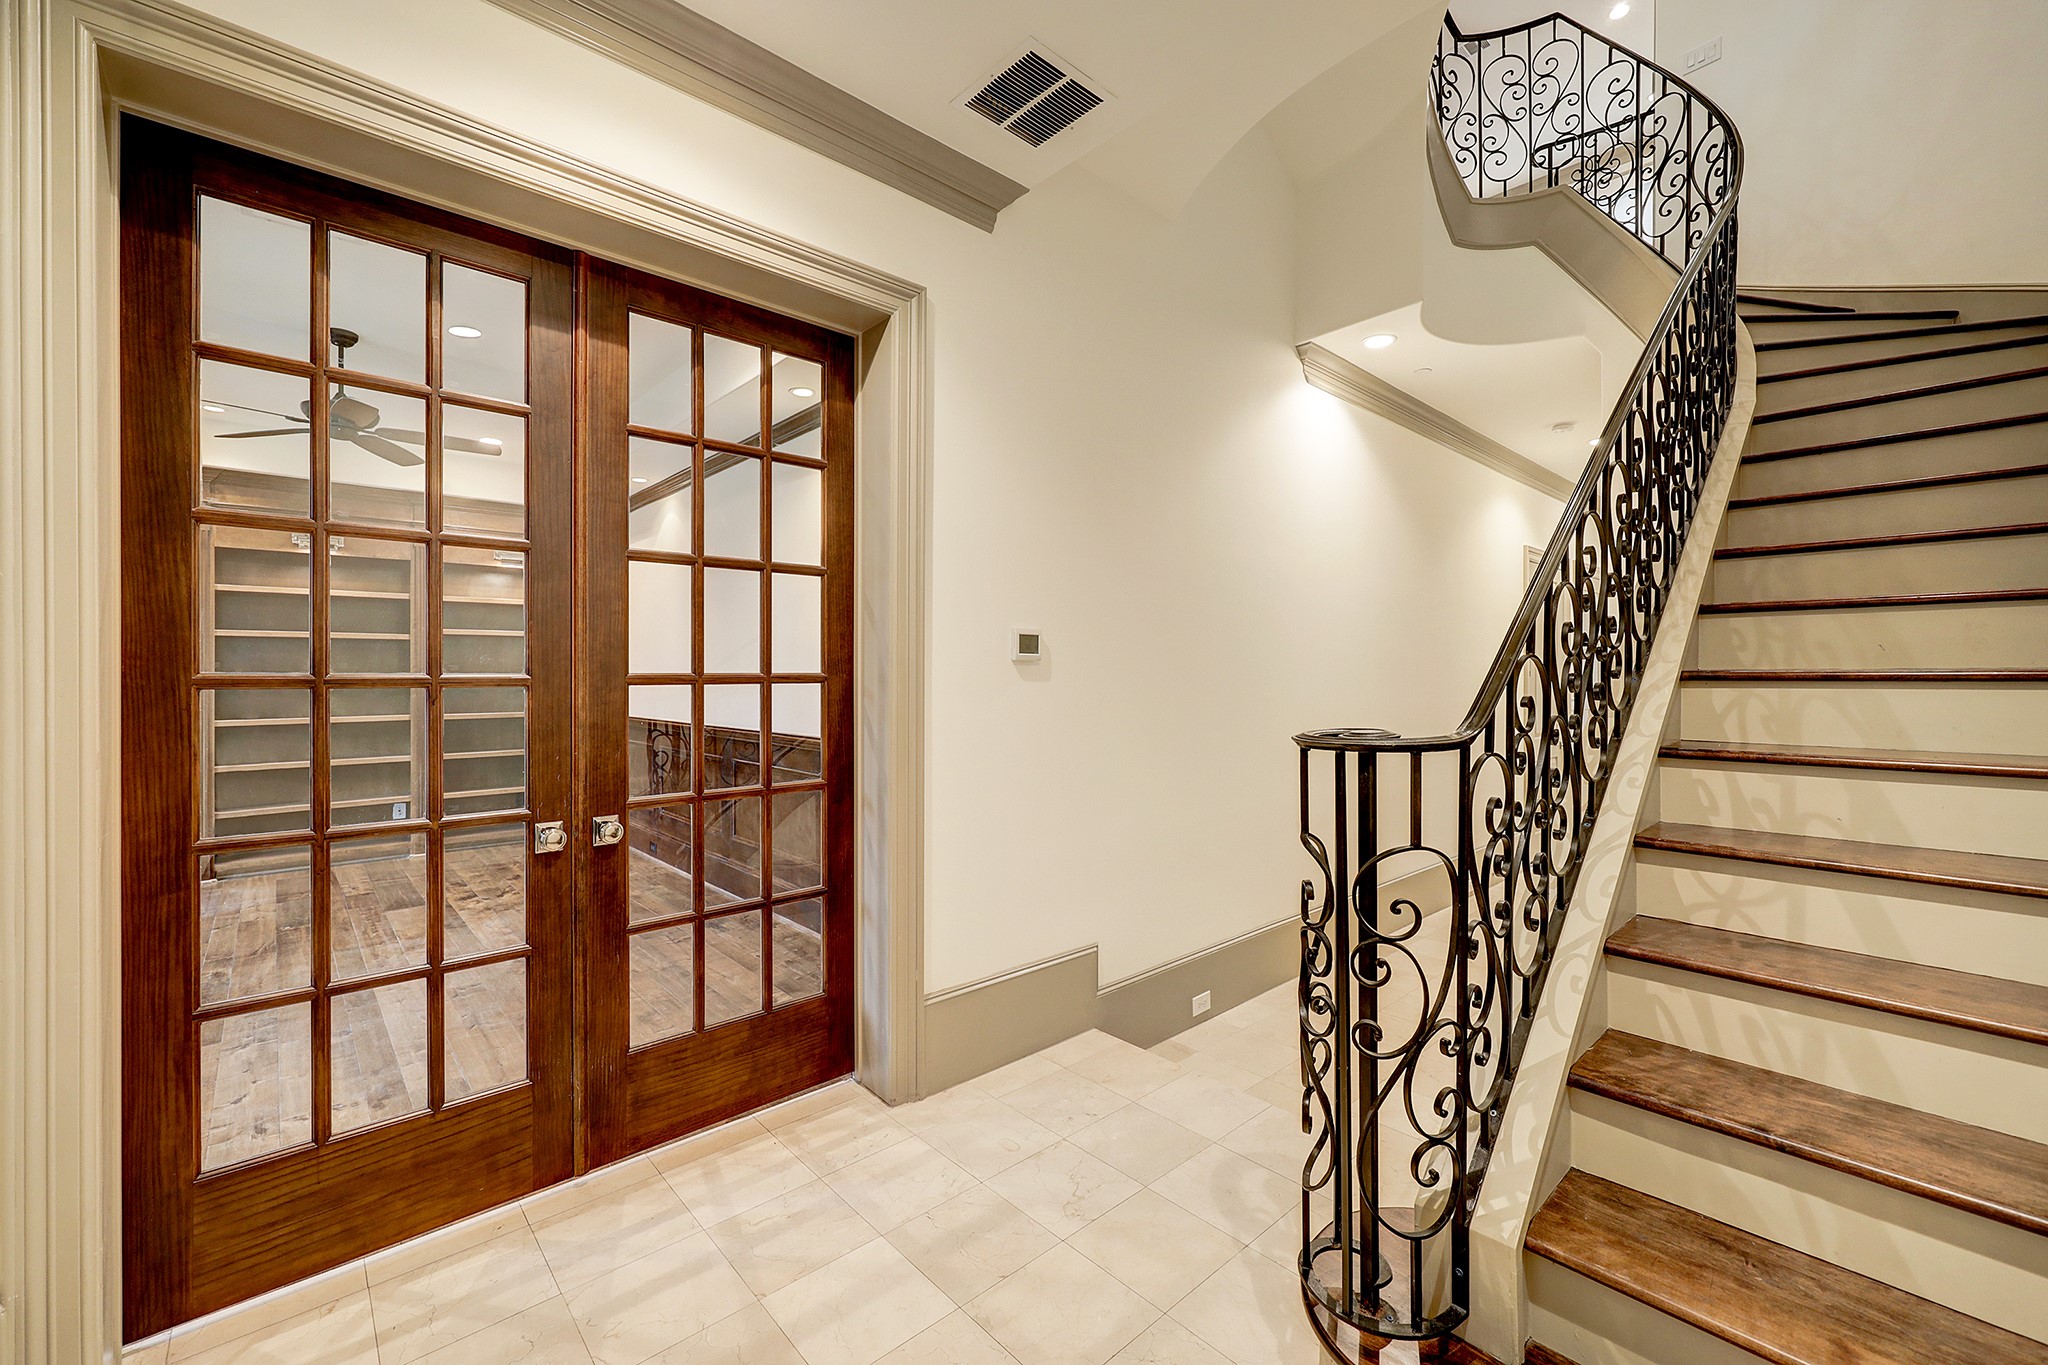 ELEGANT ENTRY SHOWING THE FRENCH DOORS TO THE LIBRARY/STUDY/CARD ROOM